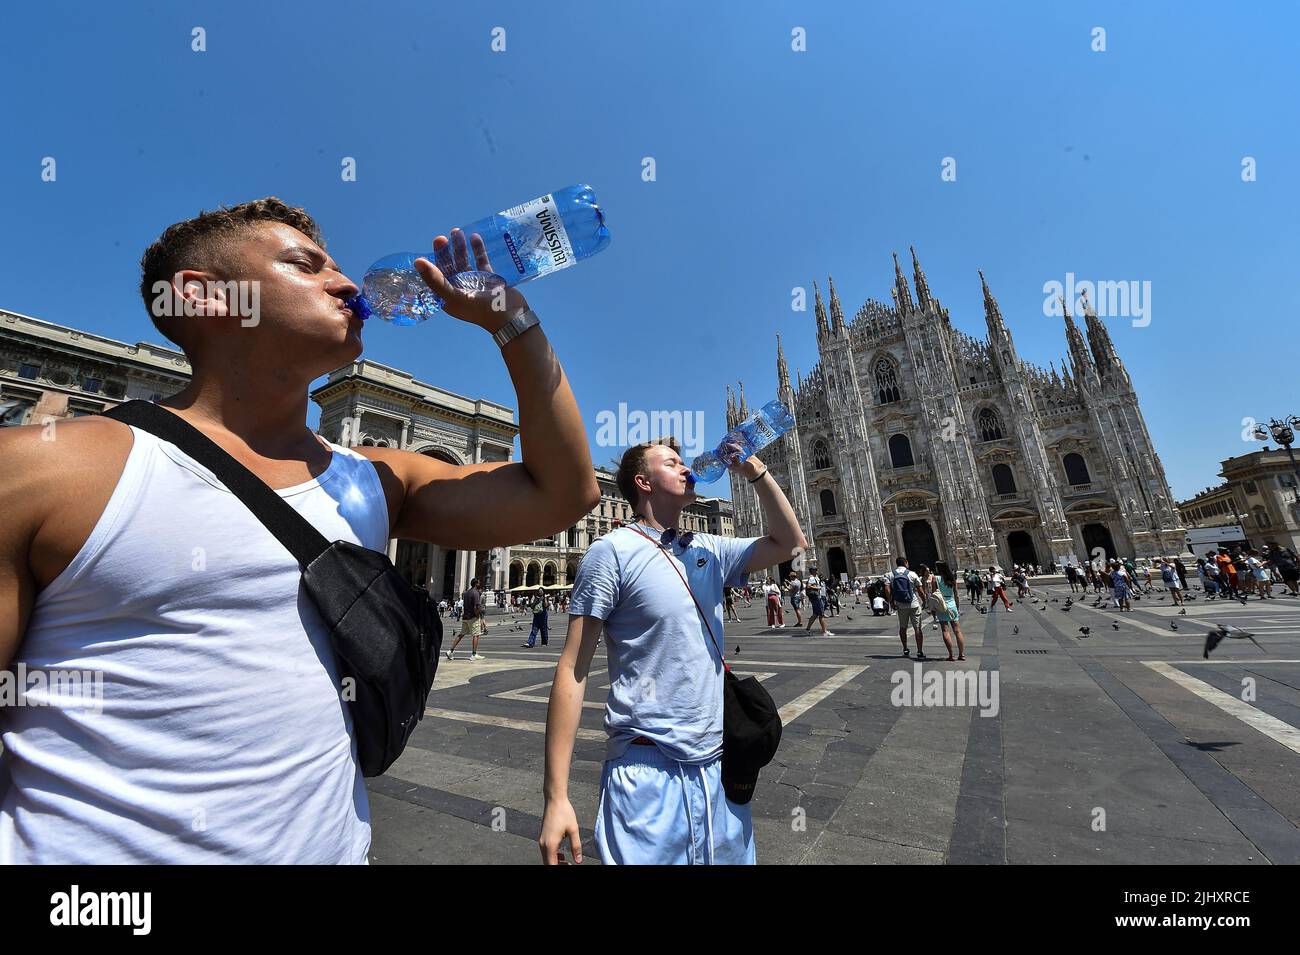 Men drink water by the Milan's Duomo cathedral at Duomo square, as  temperatures soar during a heatwave in Milan, Italy, July 21, 2022. REUTERS/ Massimo Pinca Stock Photo - Alamy